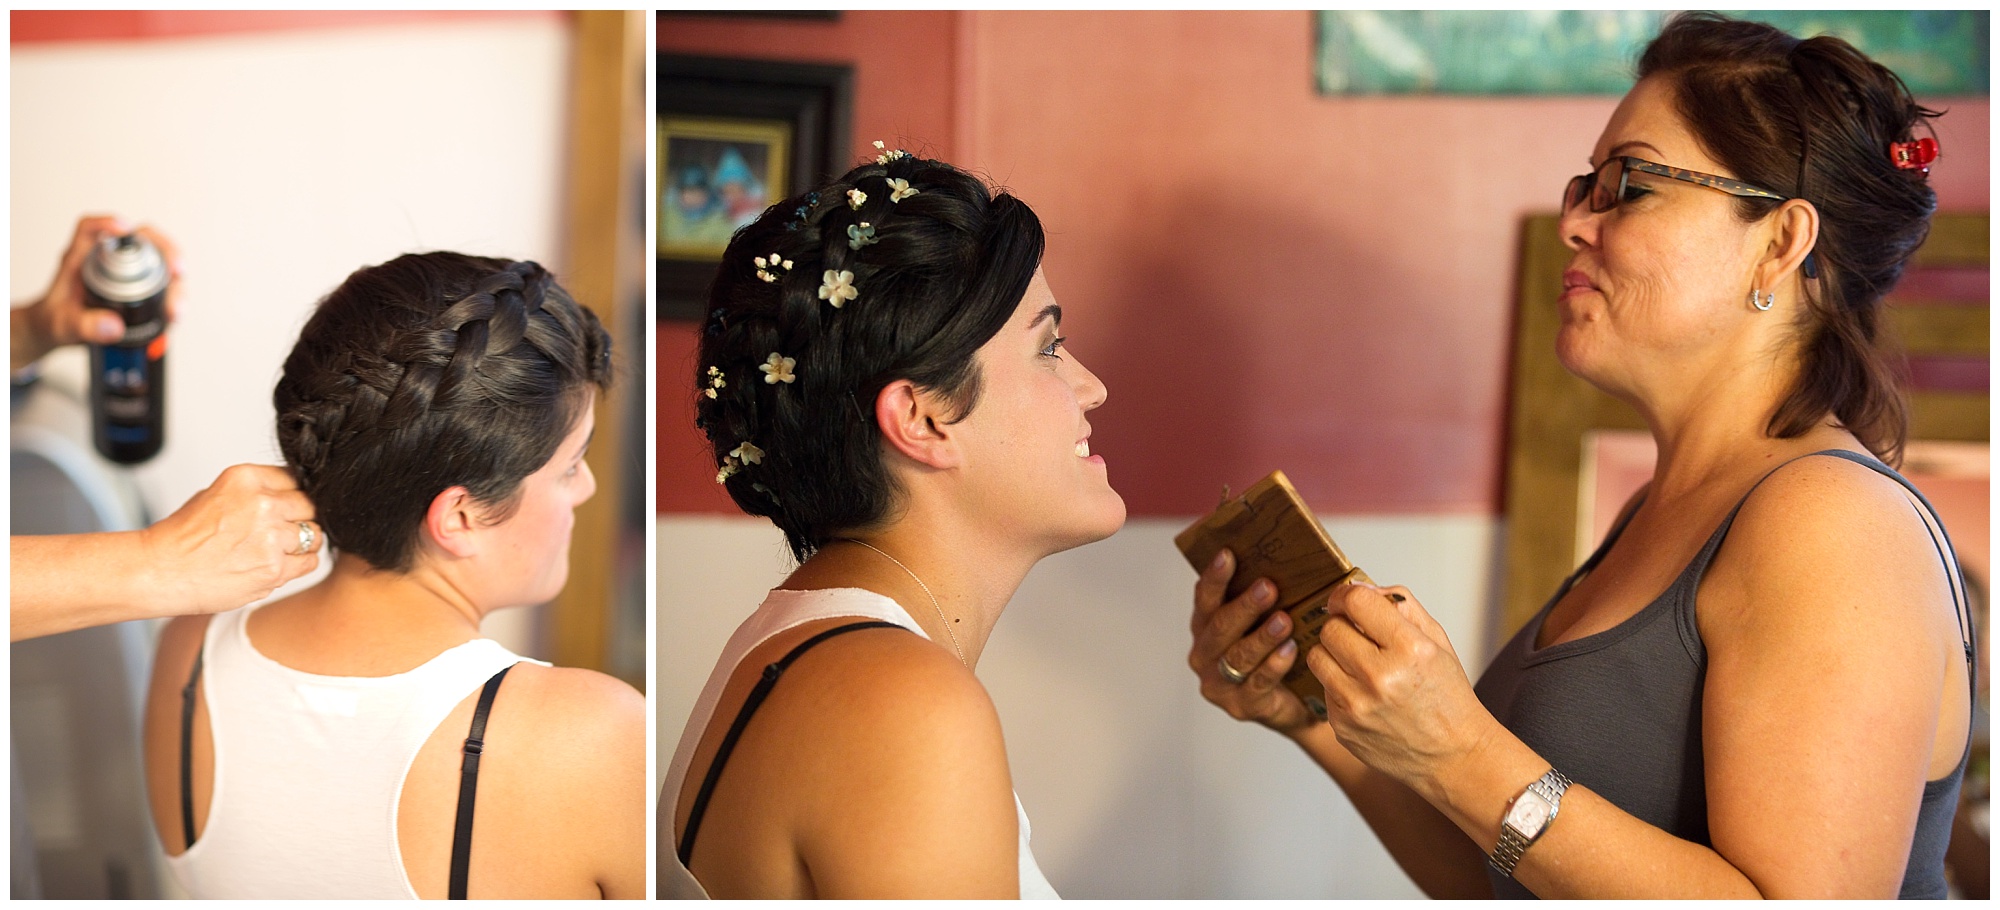 Finshing touch to make up and hair for this bride.